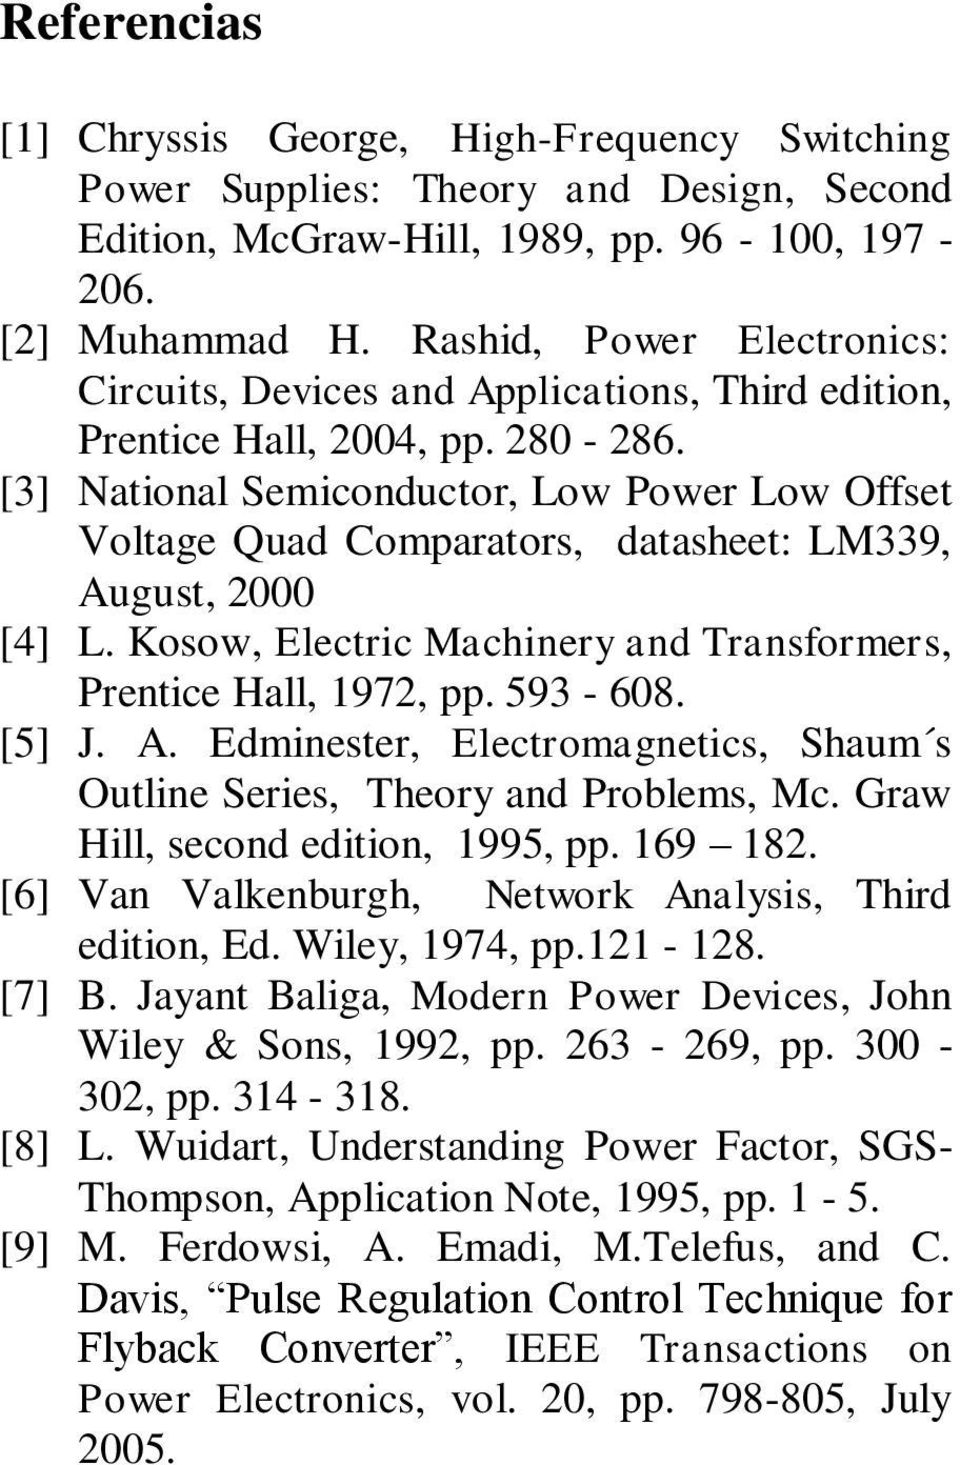 [3] National Semiconductor, Low Power Low Offset Voltage Quad Comparators, datasheet: LM339, August, 2000 [4] L. Kosow, Electric Machinery and Transformers, Prentice Hall, 1972, pp. 593-608. [5] J. A. Edminester, Electromagnetics, Shaum s Outline Series, Theory and Problems, Mc.